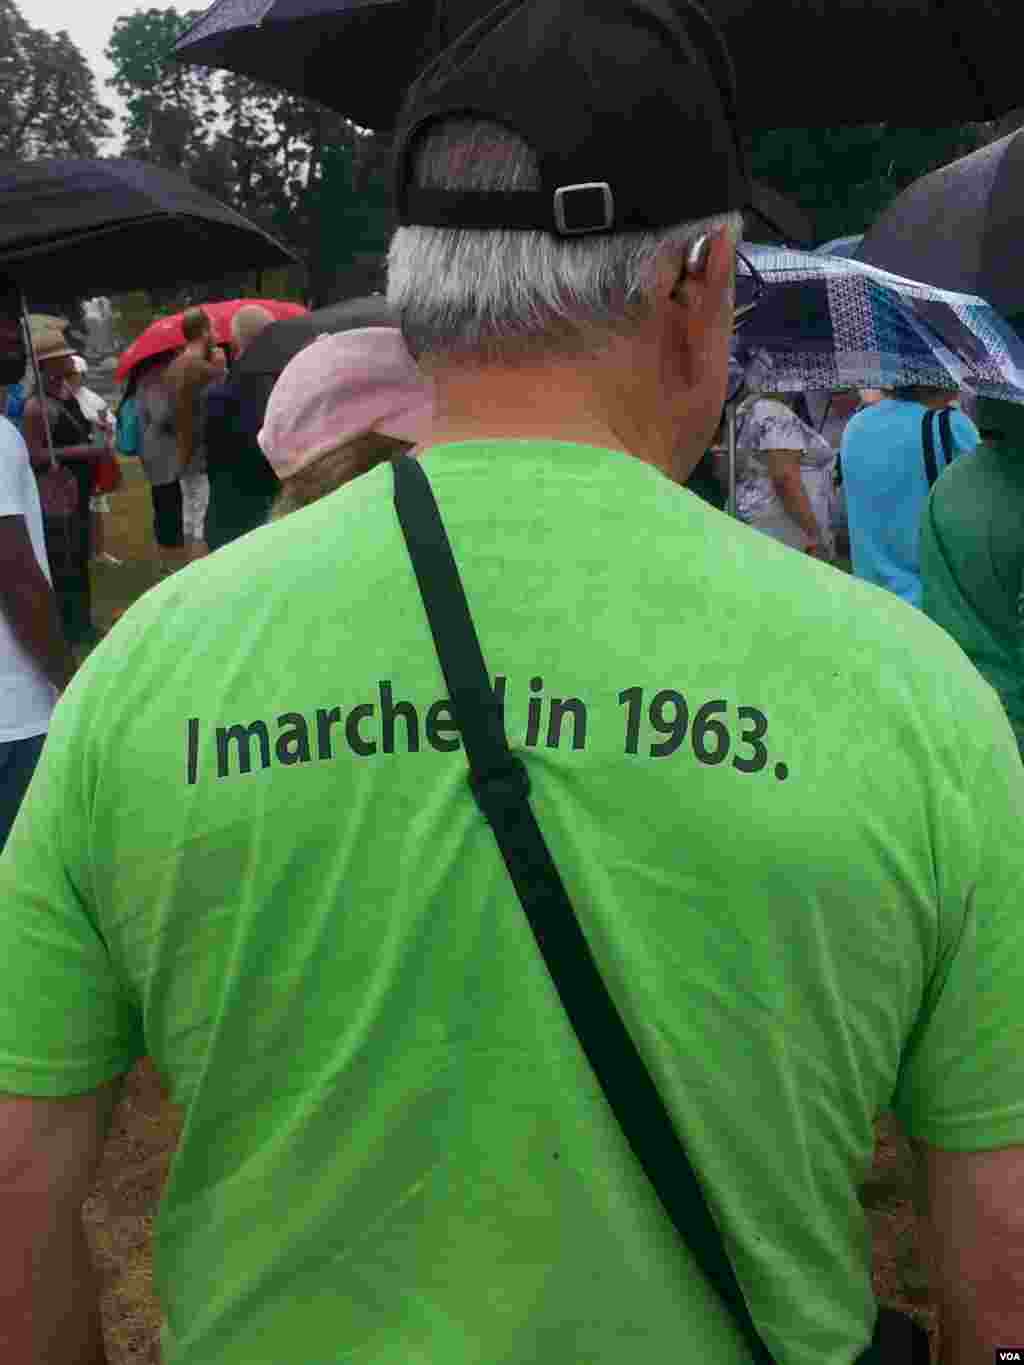 A man wears a shirt that reads "I marched in 1963" at the 50th anniversary of the March on Washington, August 28, 2013. (R. Green/VOA)